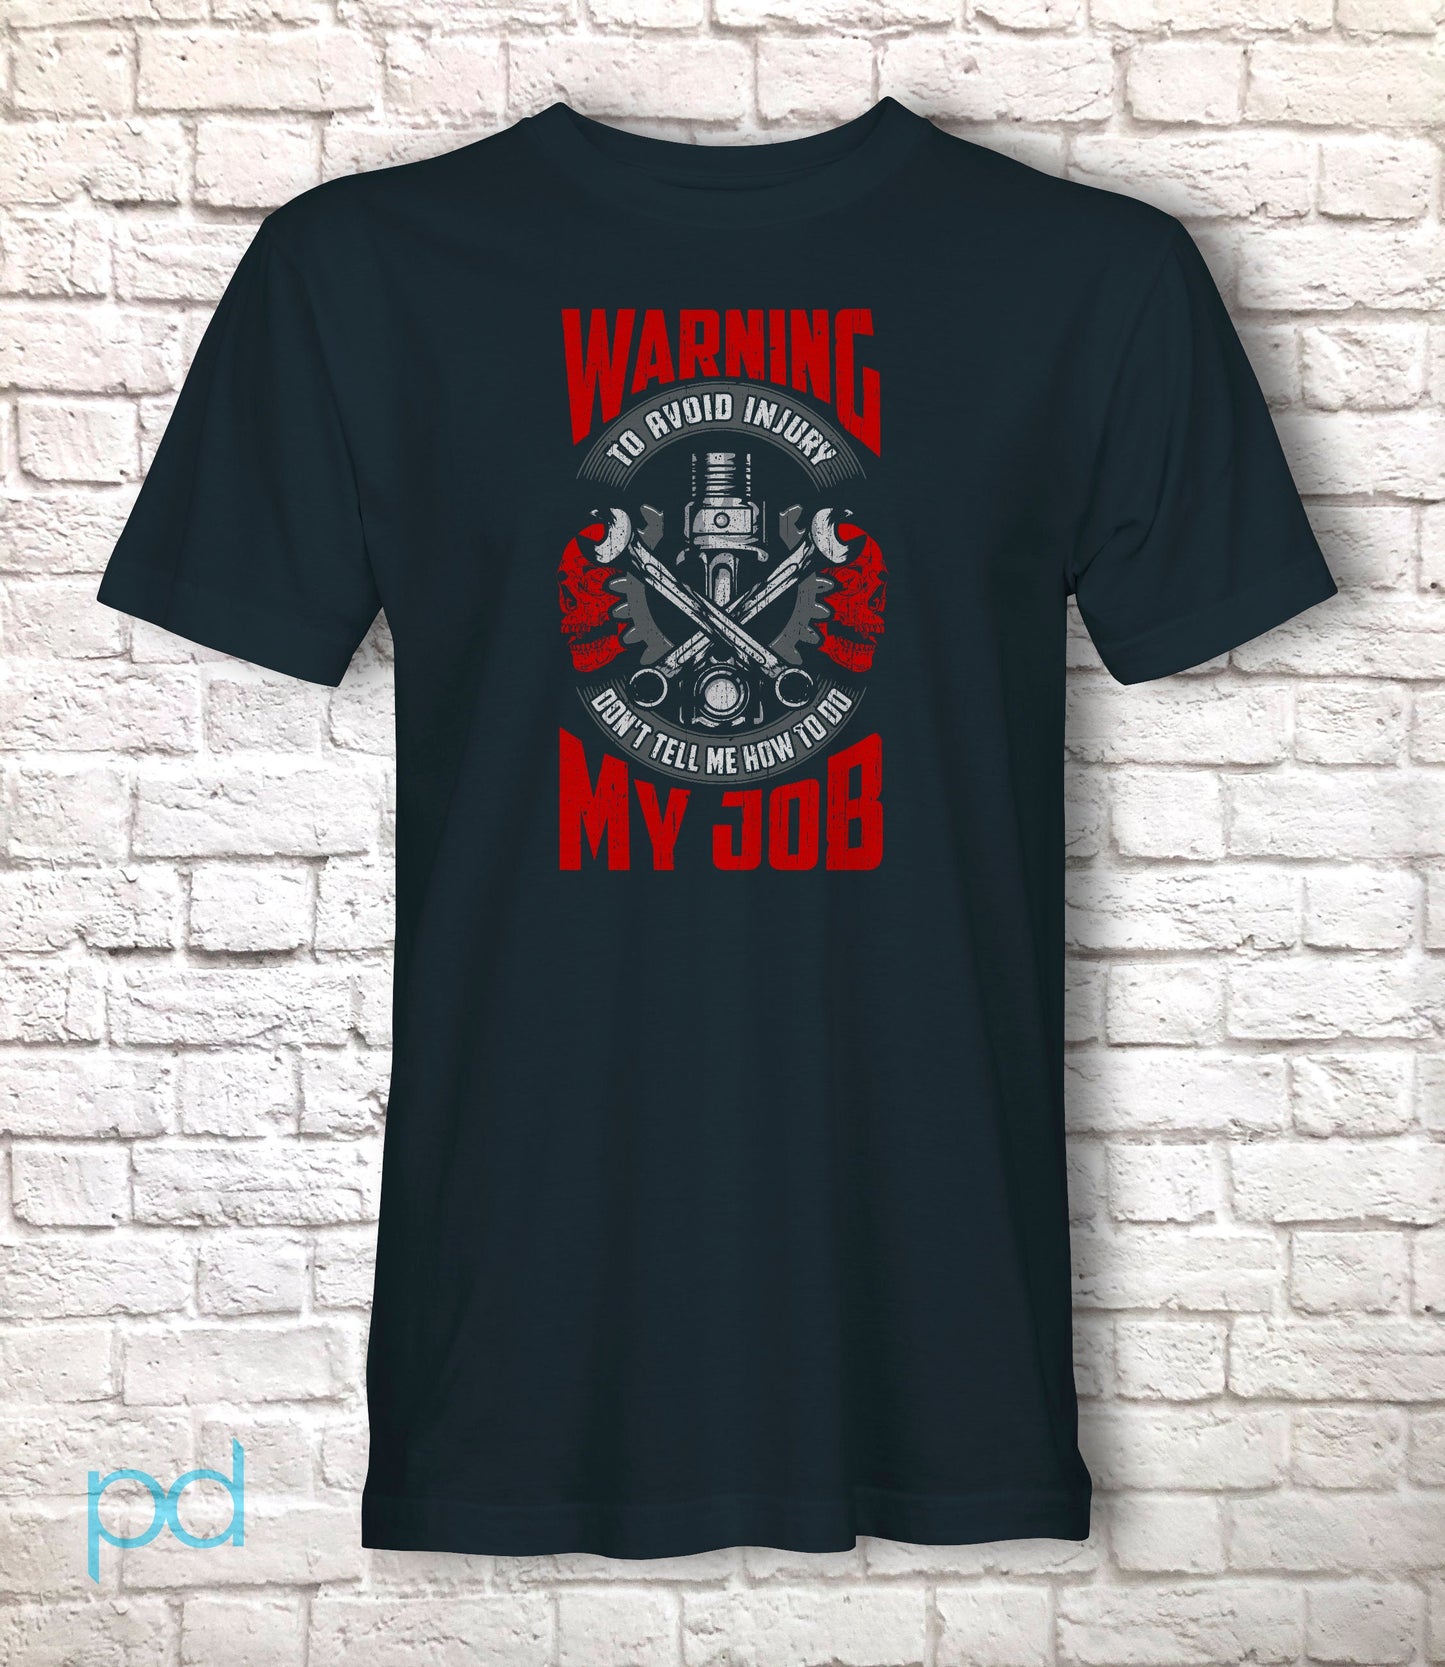 Funny Mechanic T-Shirt, Warning To Avoid Injury Don&#39;t Tell Me How To Do My Job Pun Gift Idea, Humorous Car Auto Worker Tee Shirt Top